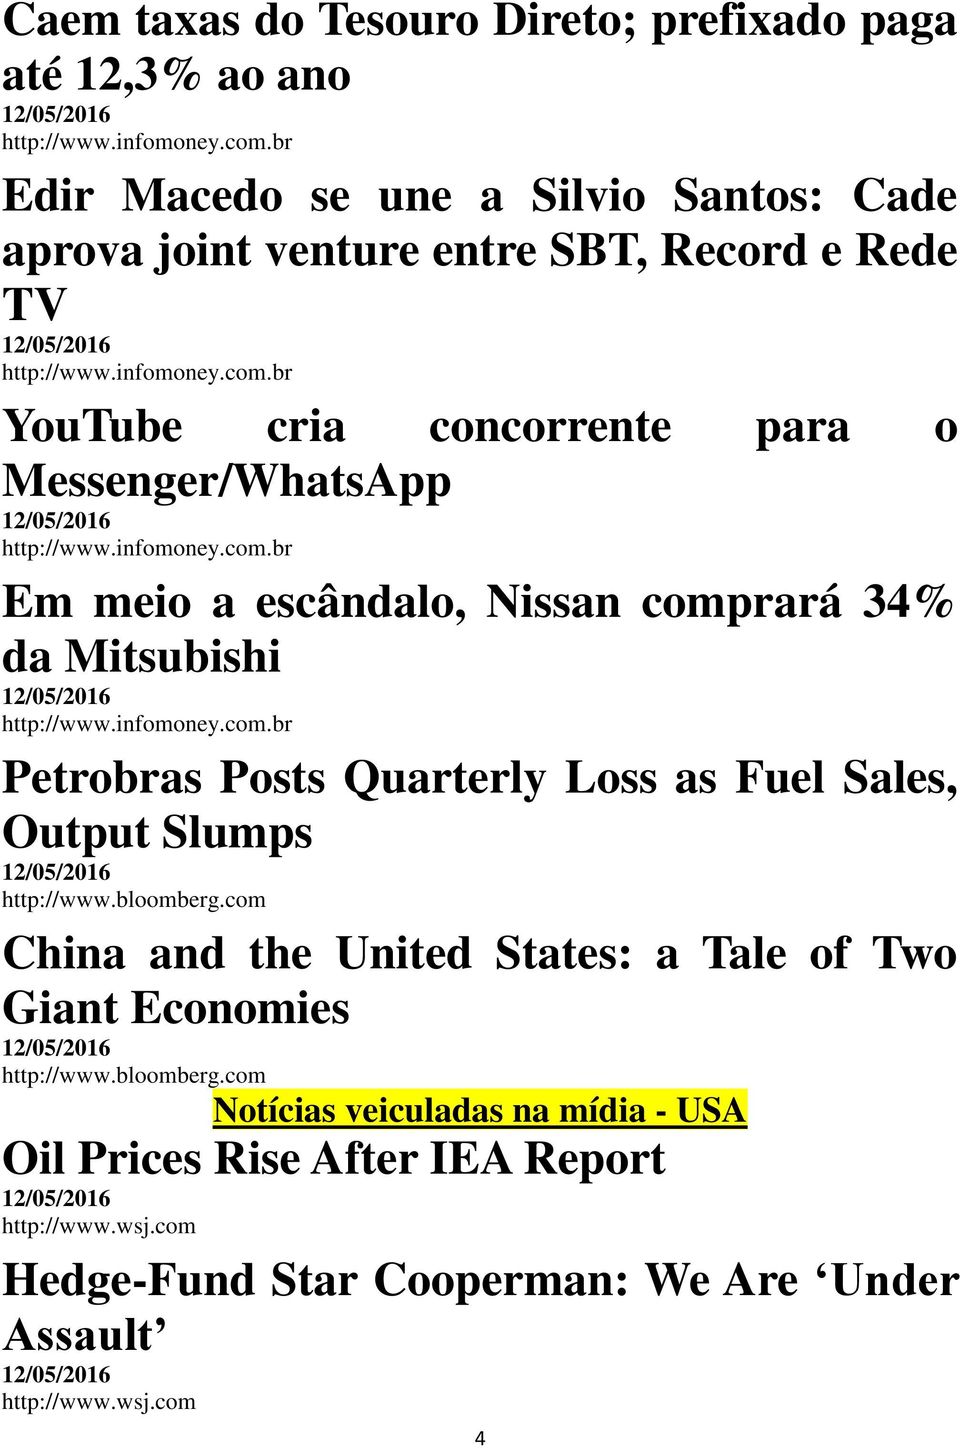 as Fuel Sales, Output Slumps http://www.bloomberg.com China and the United States: a Tale of Two Giant Economies http://www.bloomberg.com Notícias veiculadas na mídia - USA Oil Prices Rise After IEA Report http://www.